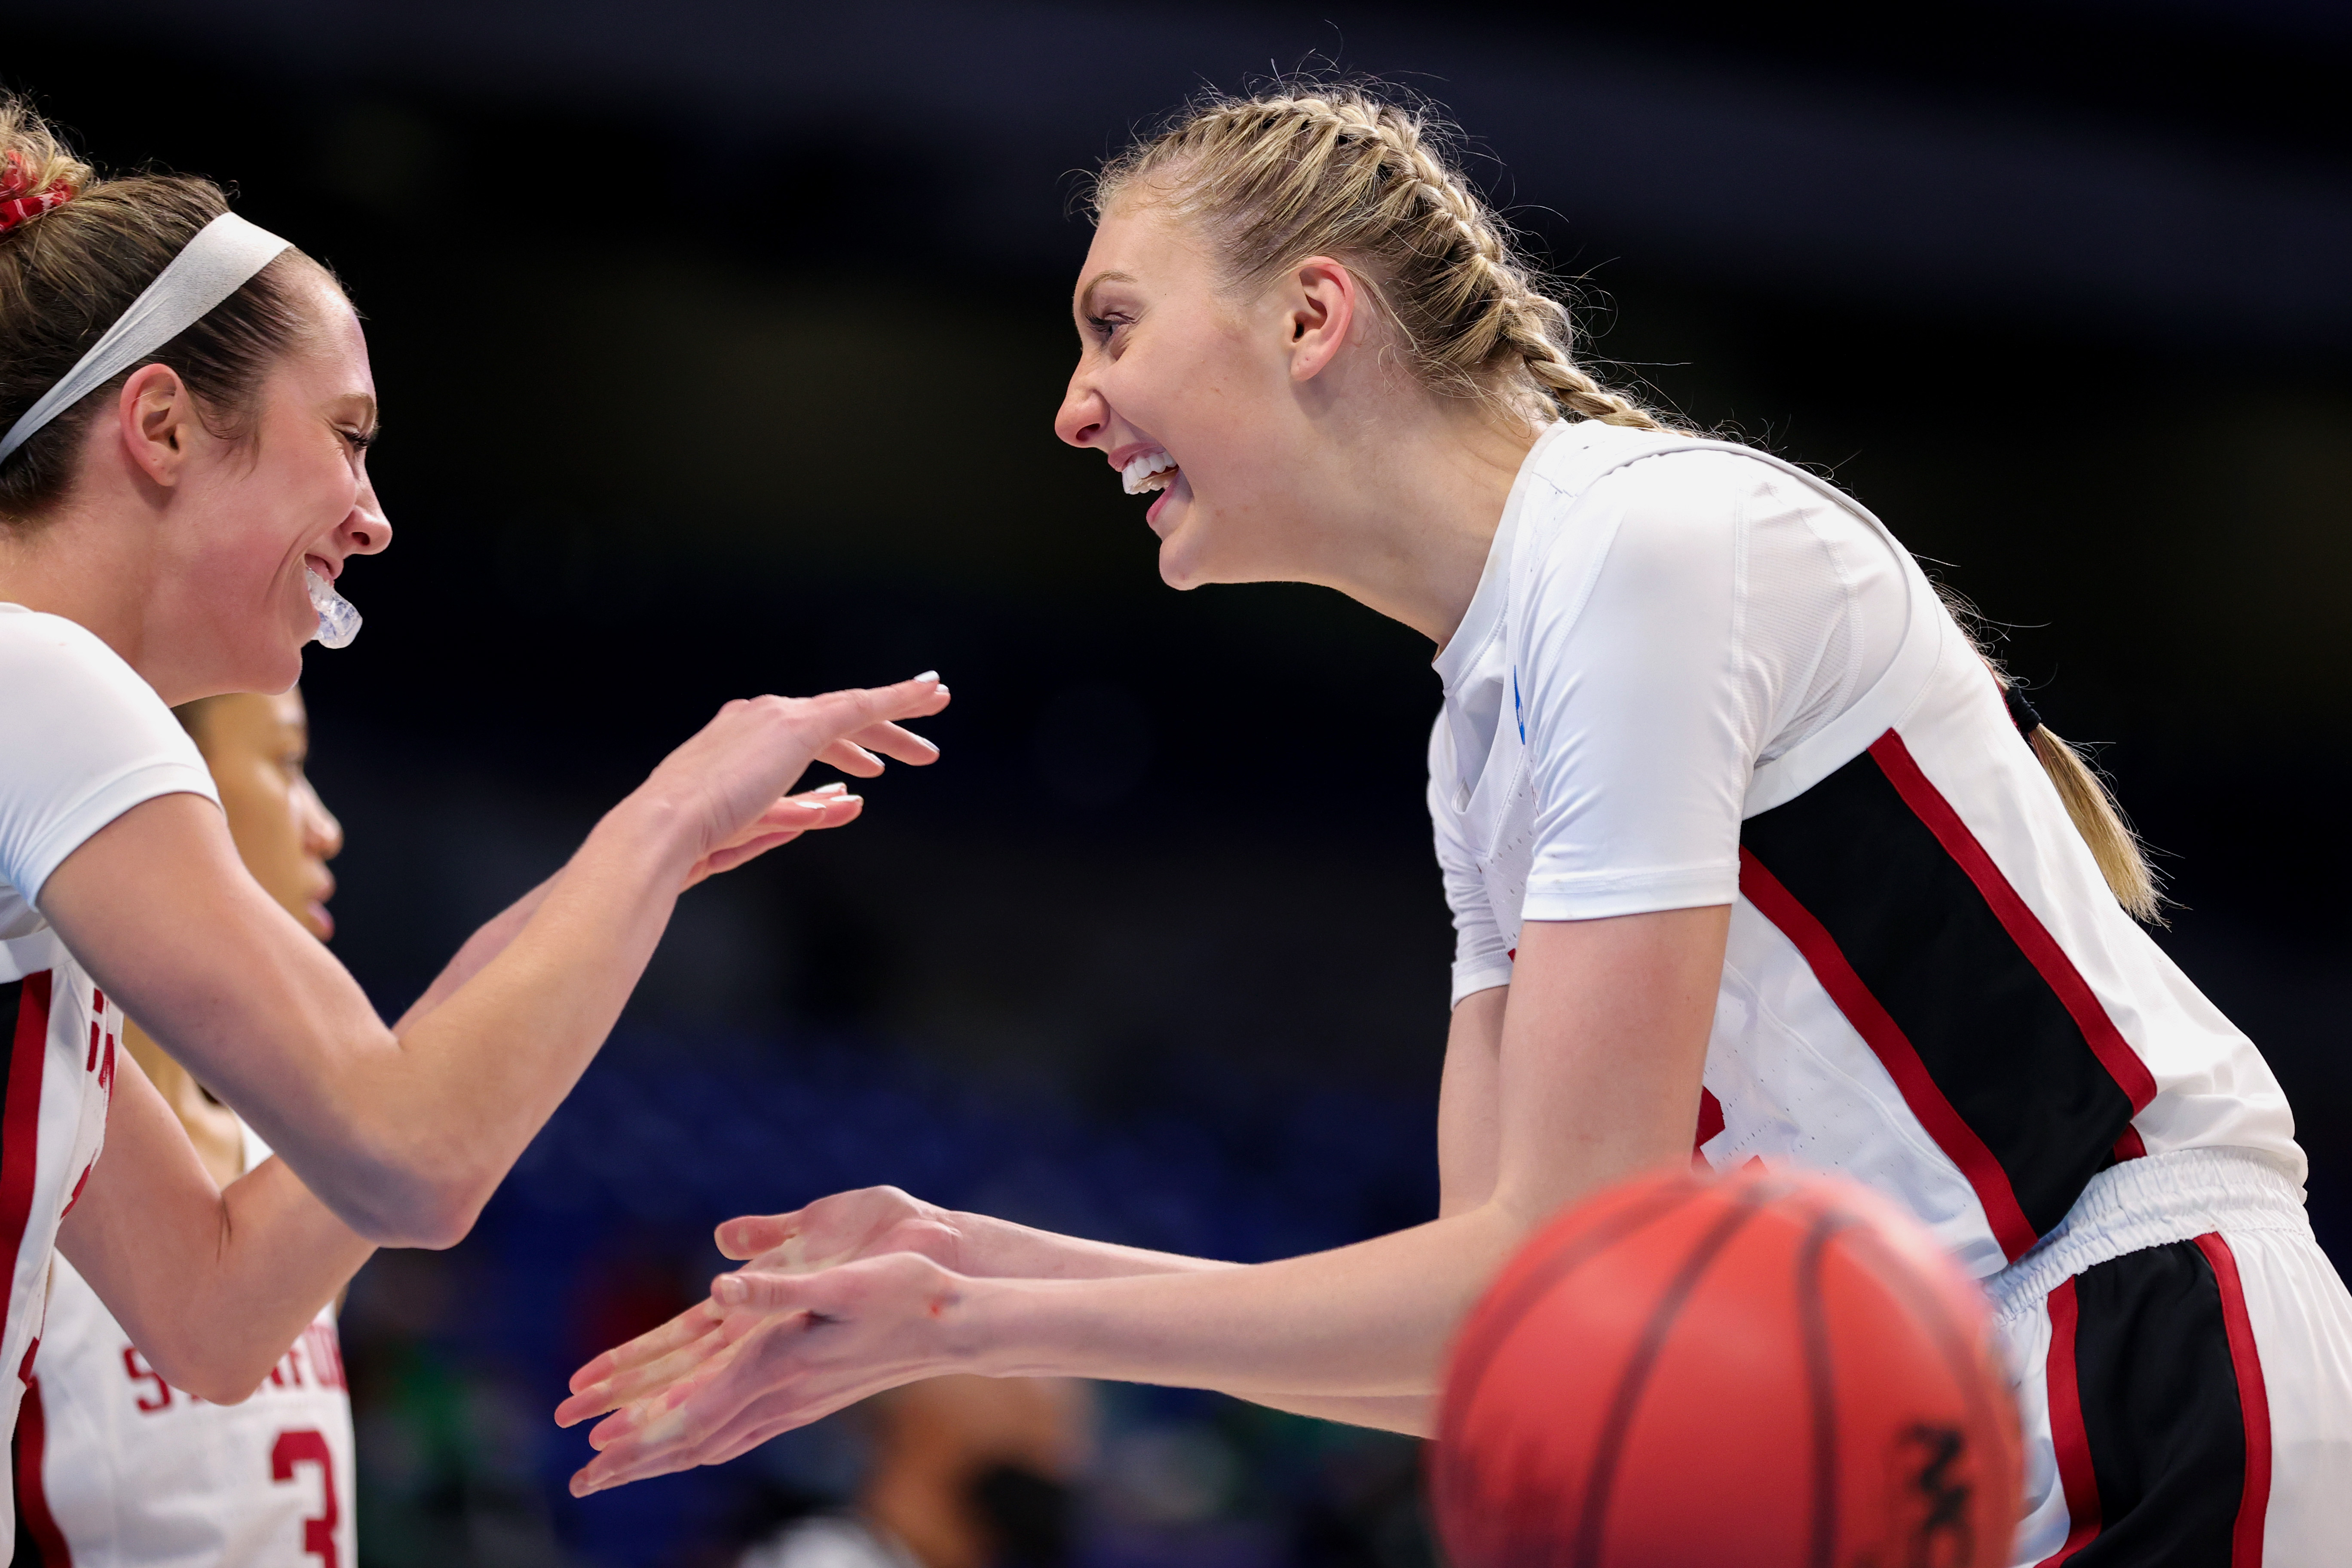 Stanford vs South Carolina womens basketball free live stream info, odds, time, TV channel, how to watch Final Four online (4/2/21)